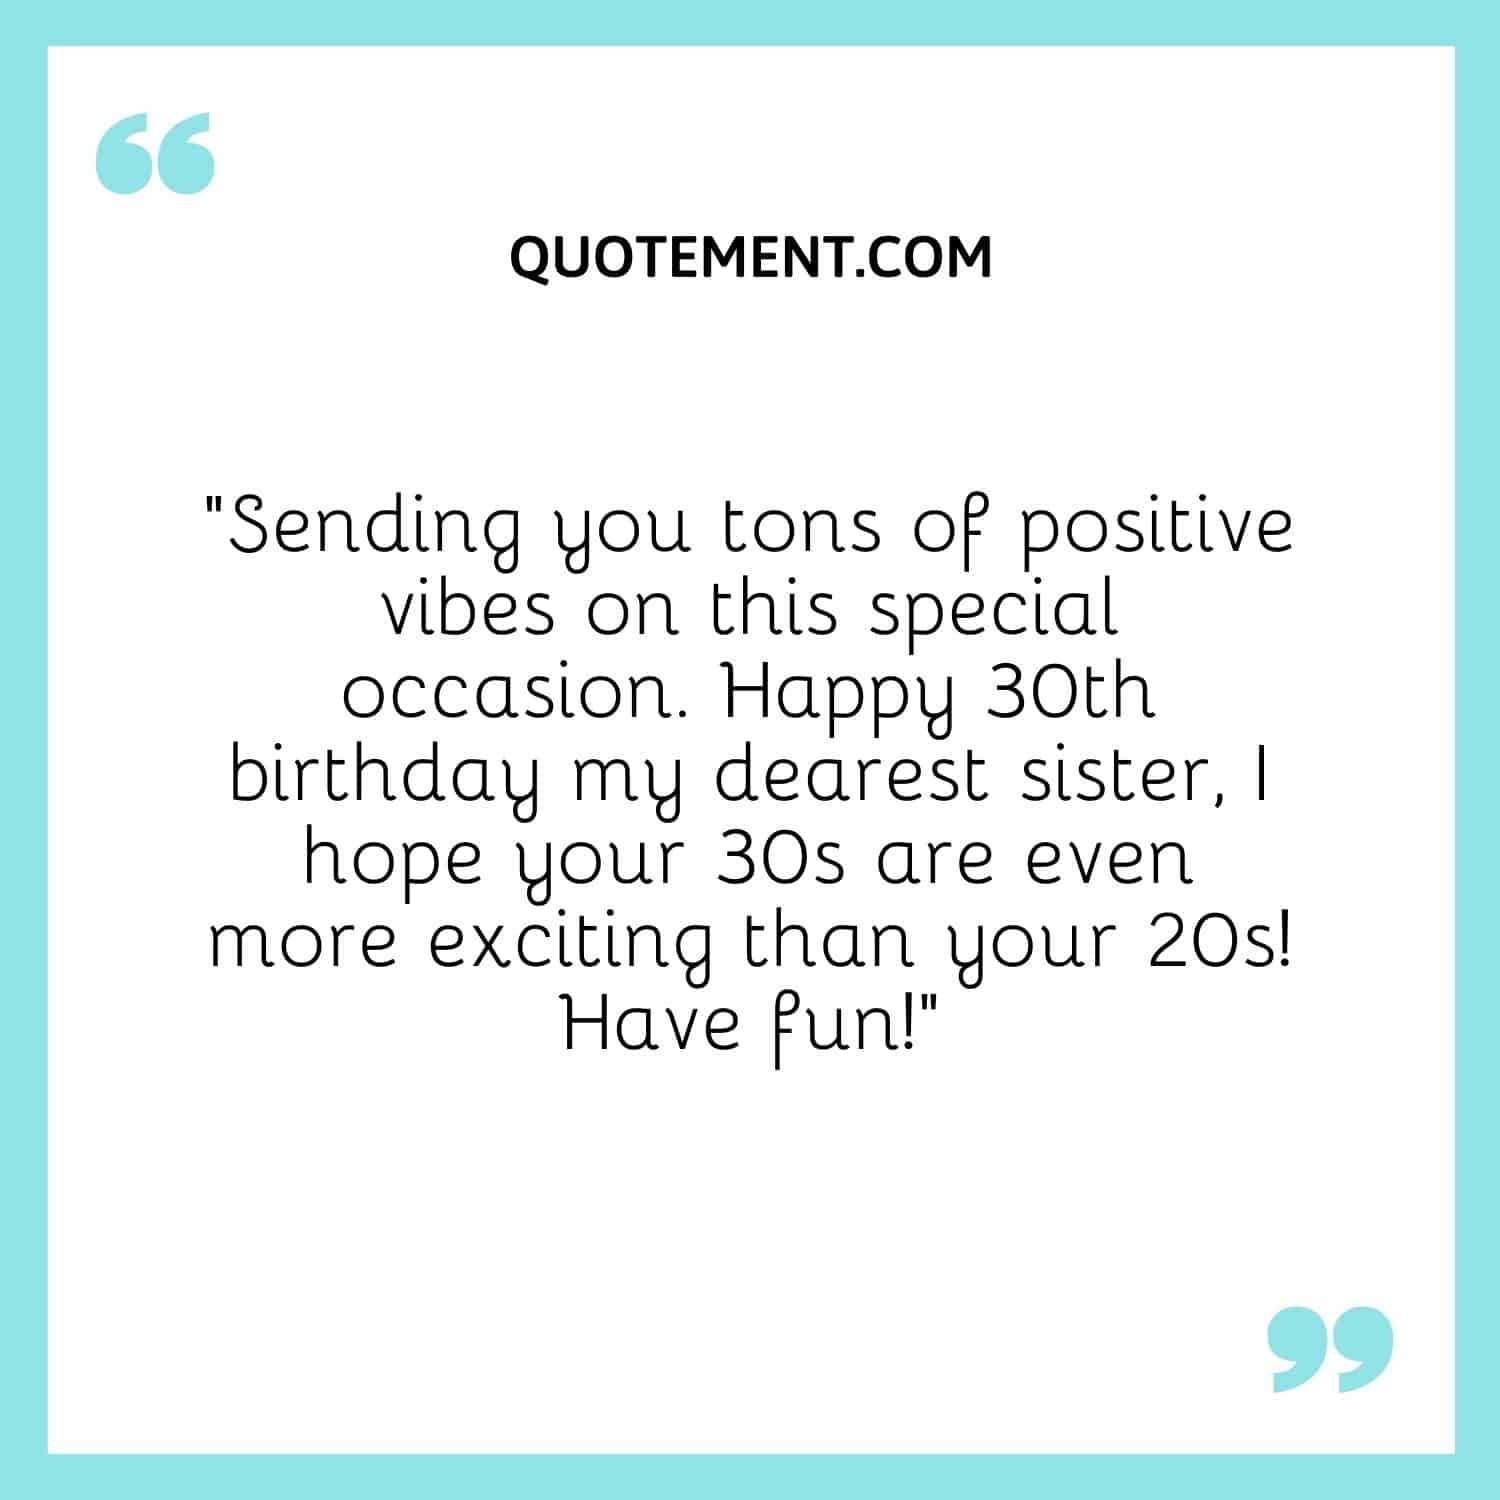 “Sending you tons of positive vibes on this special occasion. Happy 30th birthday my dearest sister, I hope your 30s are even more exciting than your 20s! Have fun!”